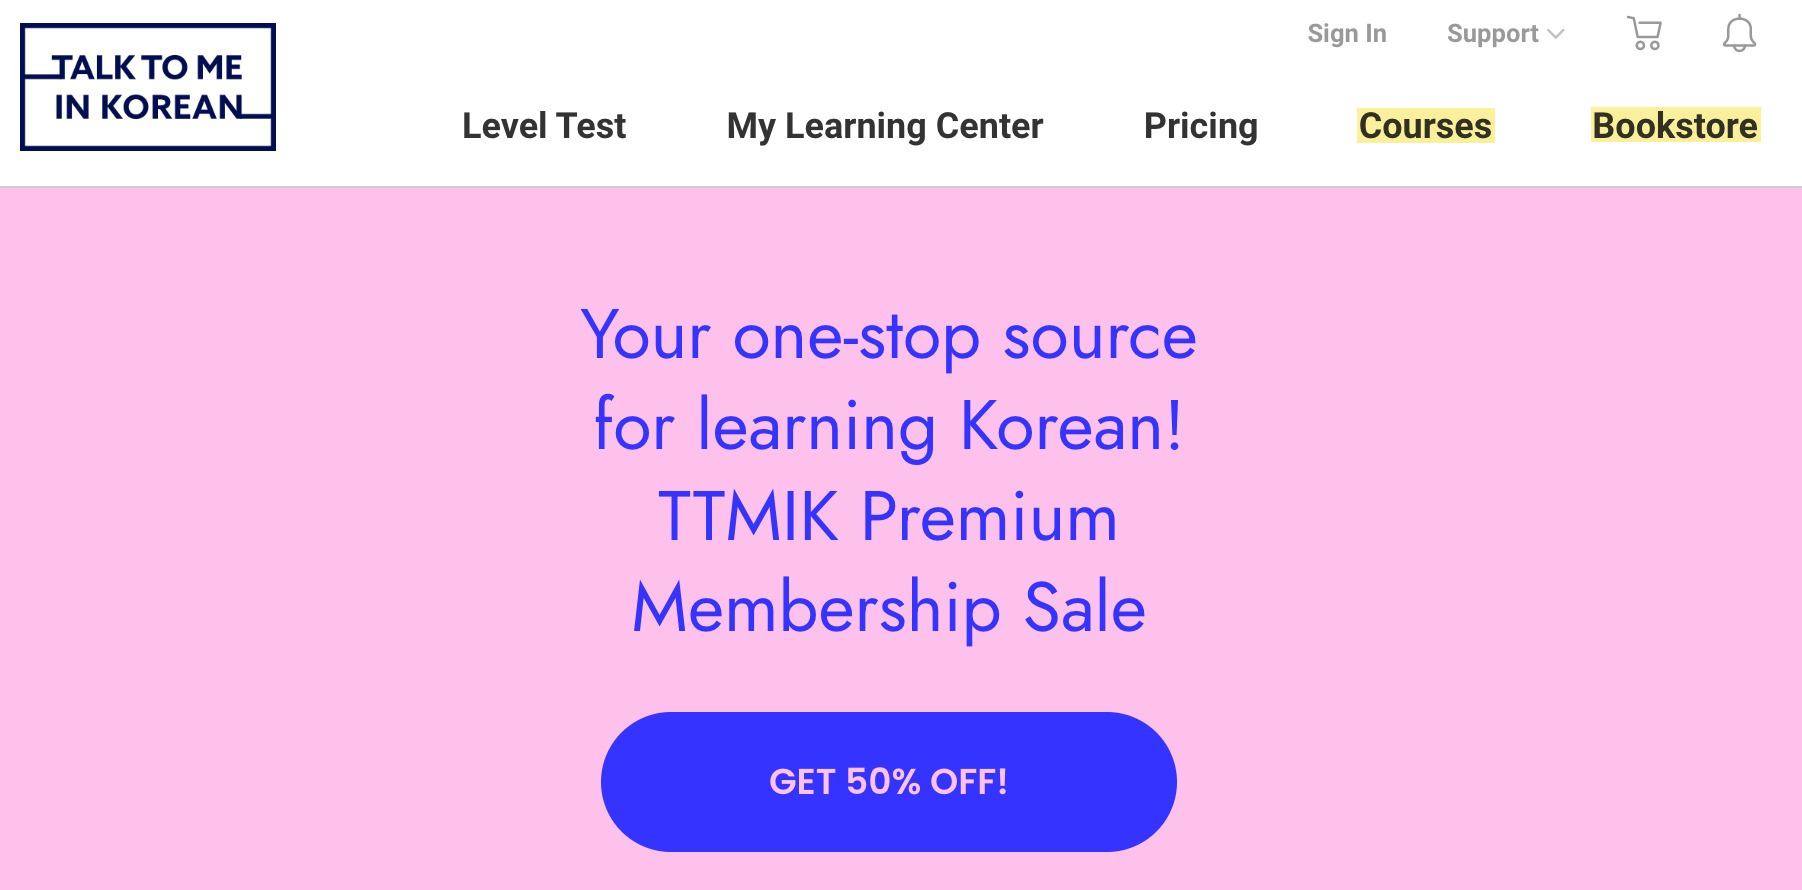 A site selling educational books and courses about learning Korean